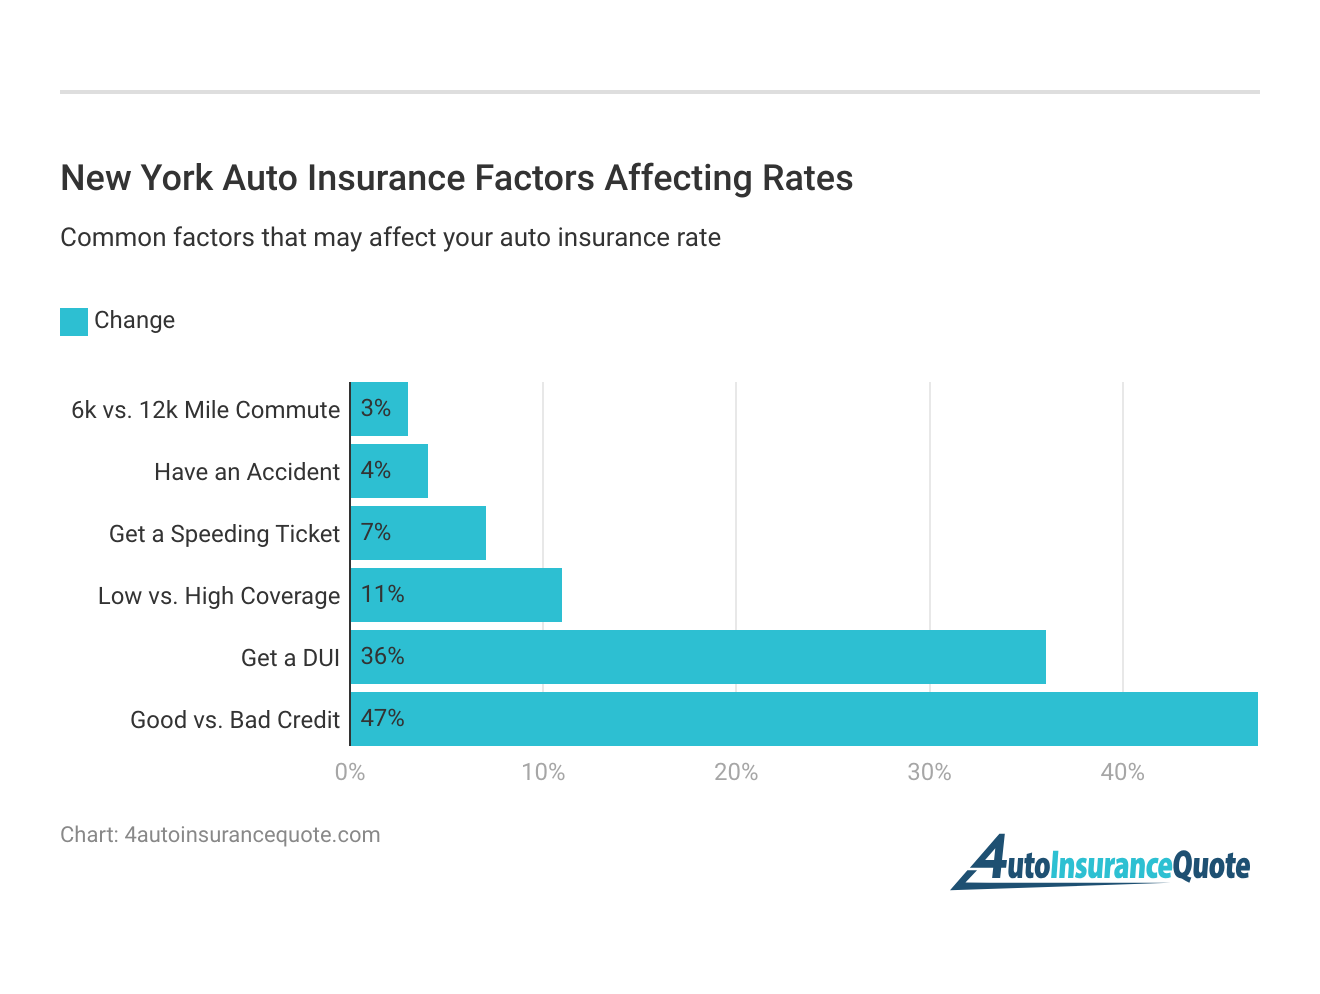 <h3>New York Auto Insurance Factors Affecting Rates</h3>